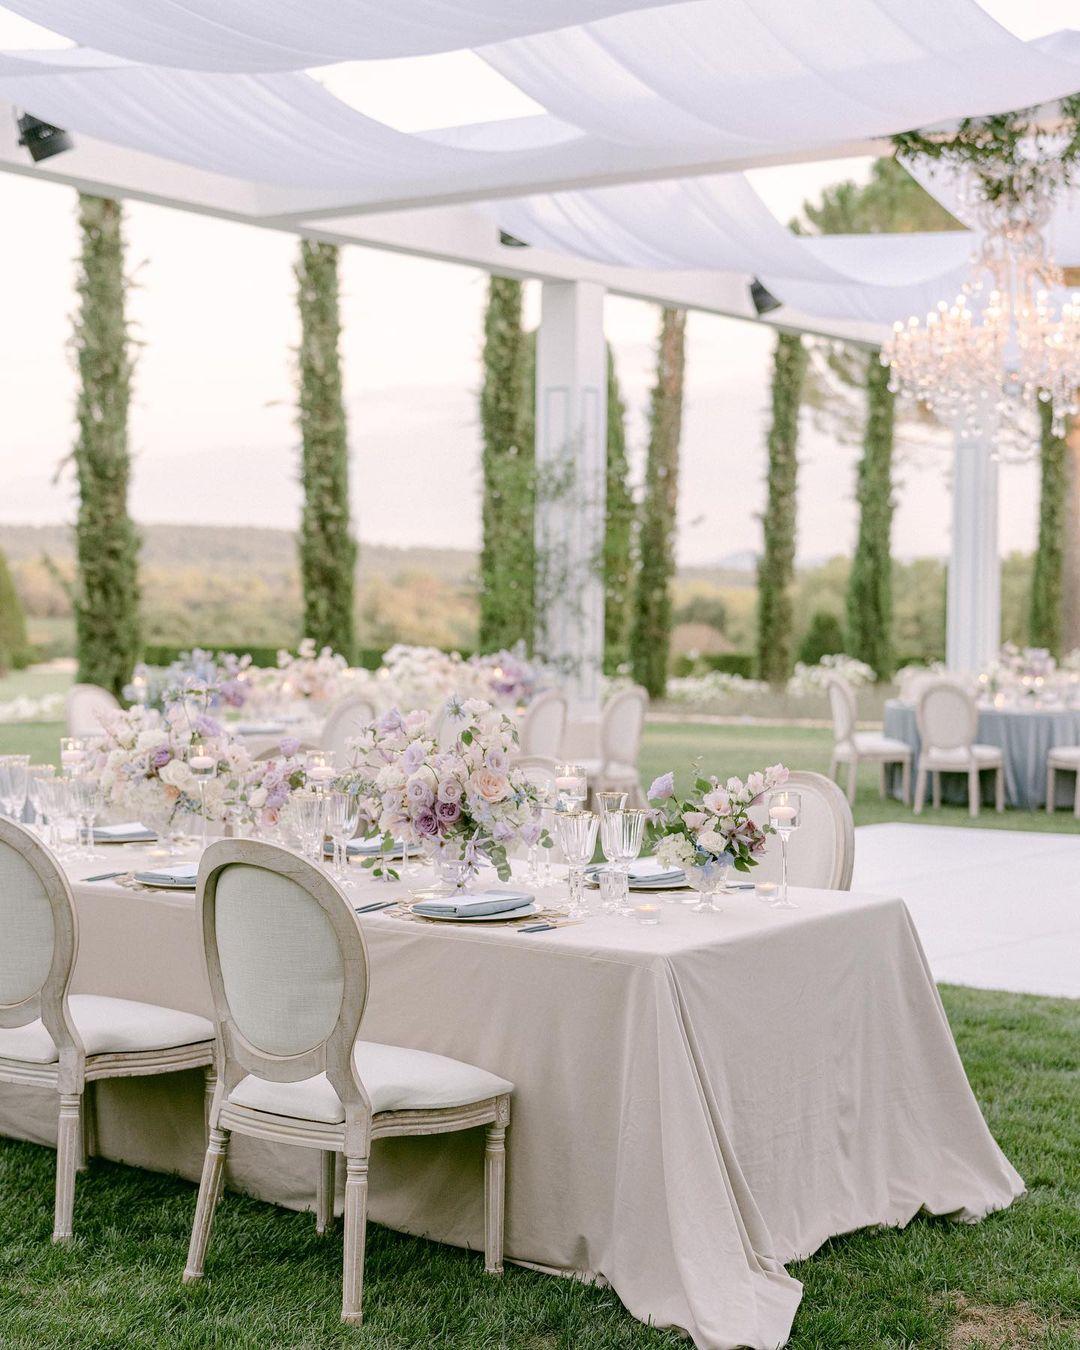 class="content__text"
 E&amp;J’s dinner reception beautiful captured by @ktmerry in Provence gives us all the feels! We can’t wait to be back at @chateaudelagaude in a few months for such an exciting weekend! 

@ktmerry @aaronnovakfilms @chateaudelagaude @cremedepapier @missrose_by_perrine @brides @options_aixenprovence @phos_events @selecktive_official 
 